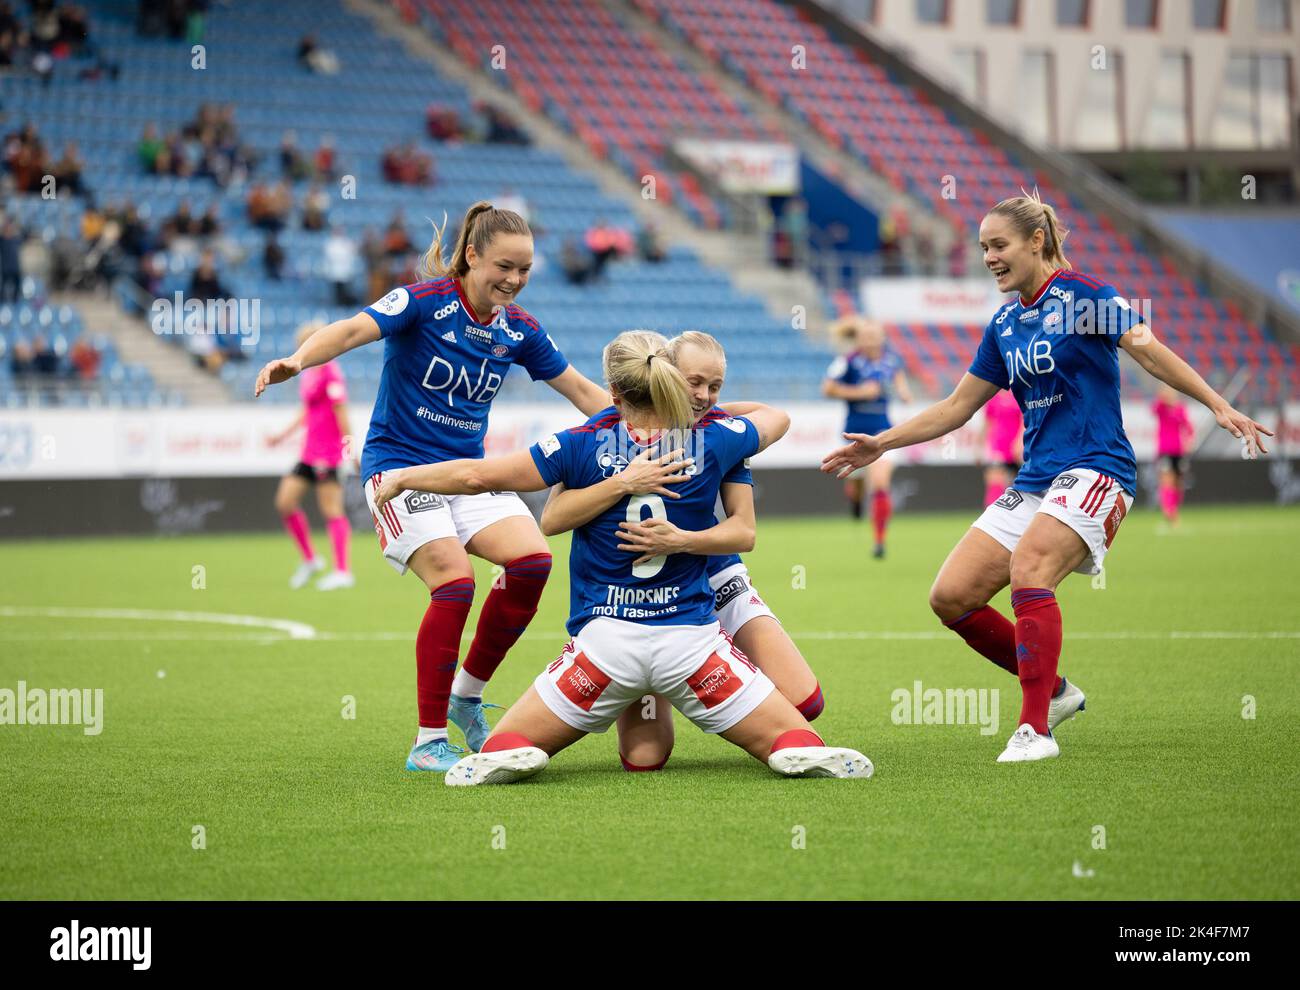 Oslo, Norway. 02nd Oct, 2022. Oslo, Norway, October 2nd 2022: Elise Thorsnes (9 Valerenga) celebrates after scoring her goal number 200 in Toppserien during the playoff game in Toppserien between Valerenga and Rosenborg at Intility Arena in Oslo, Norway (Ane Frosaker/SPP) Credit: SPP Sport Press Photo. /Alamy Live News Stock Photo